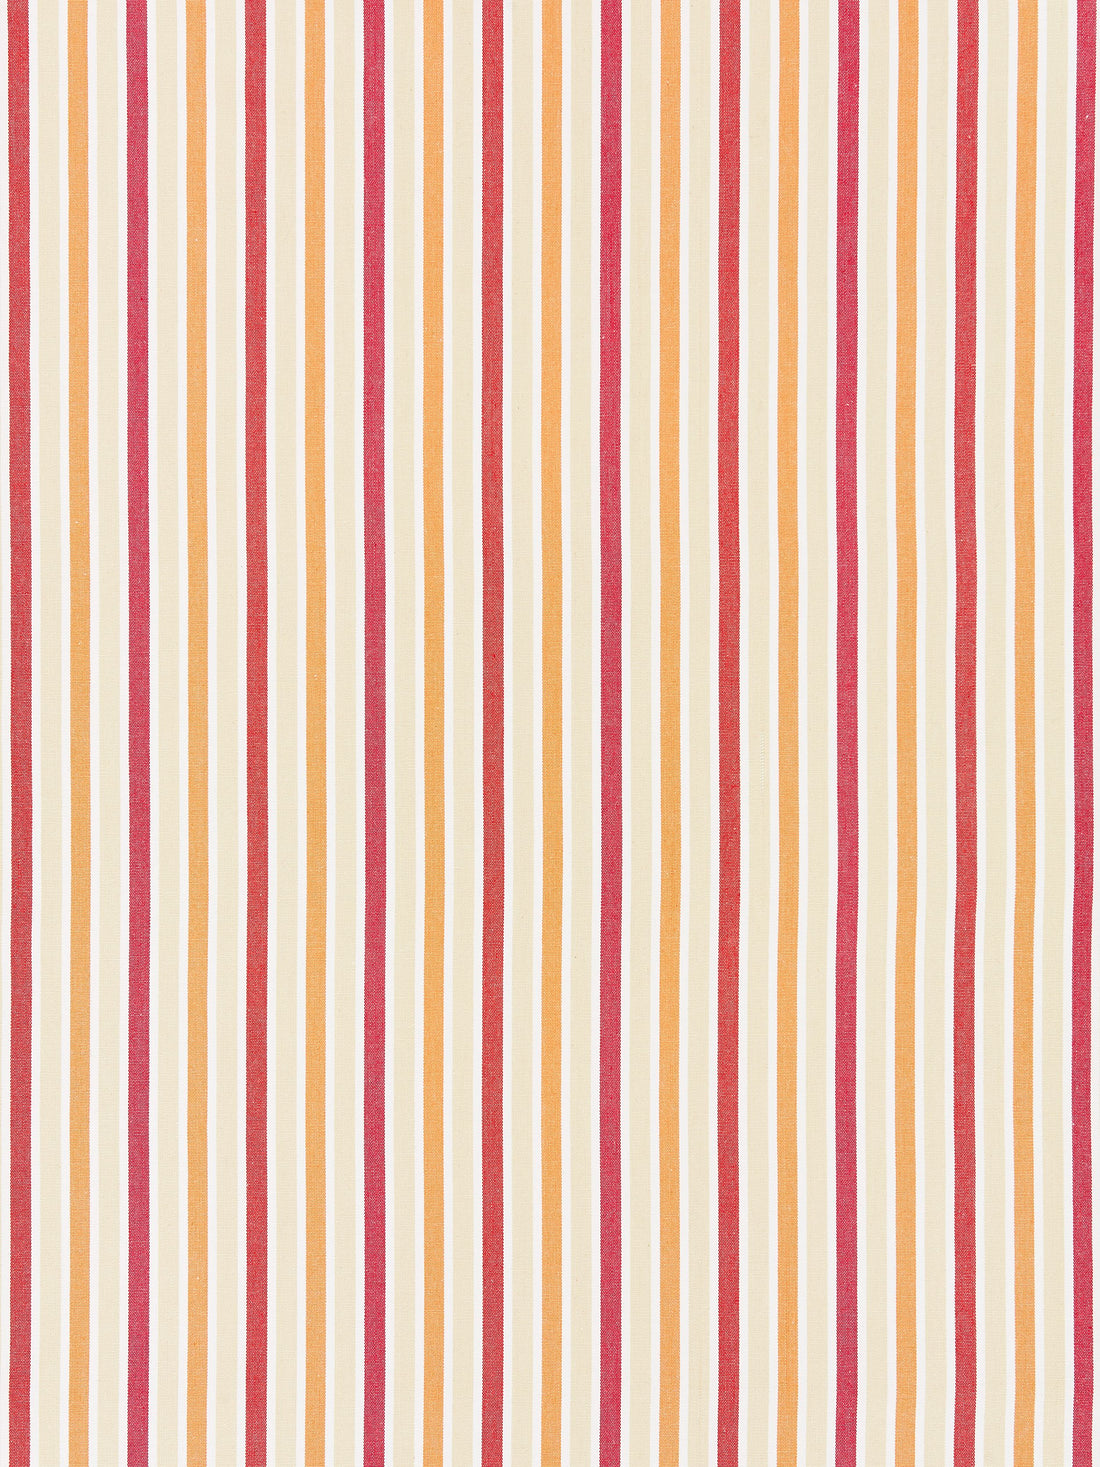 Leeds Cotton Stripe fabric in coral color - pattern number SC 000227114 - by Scalamandre in the Scalamandre Fabrics Book 1 collection